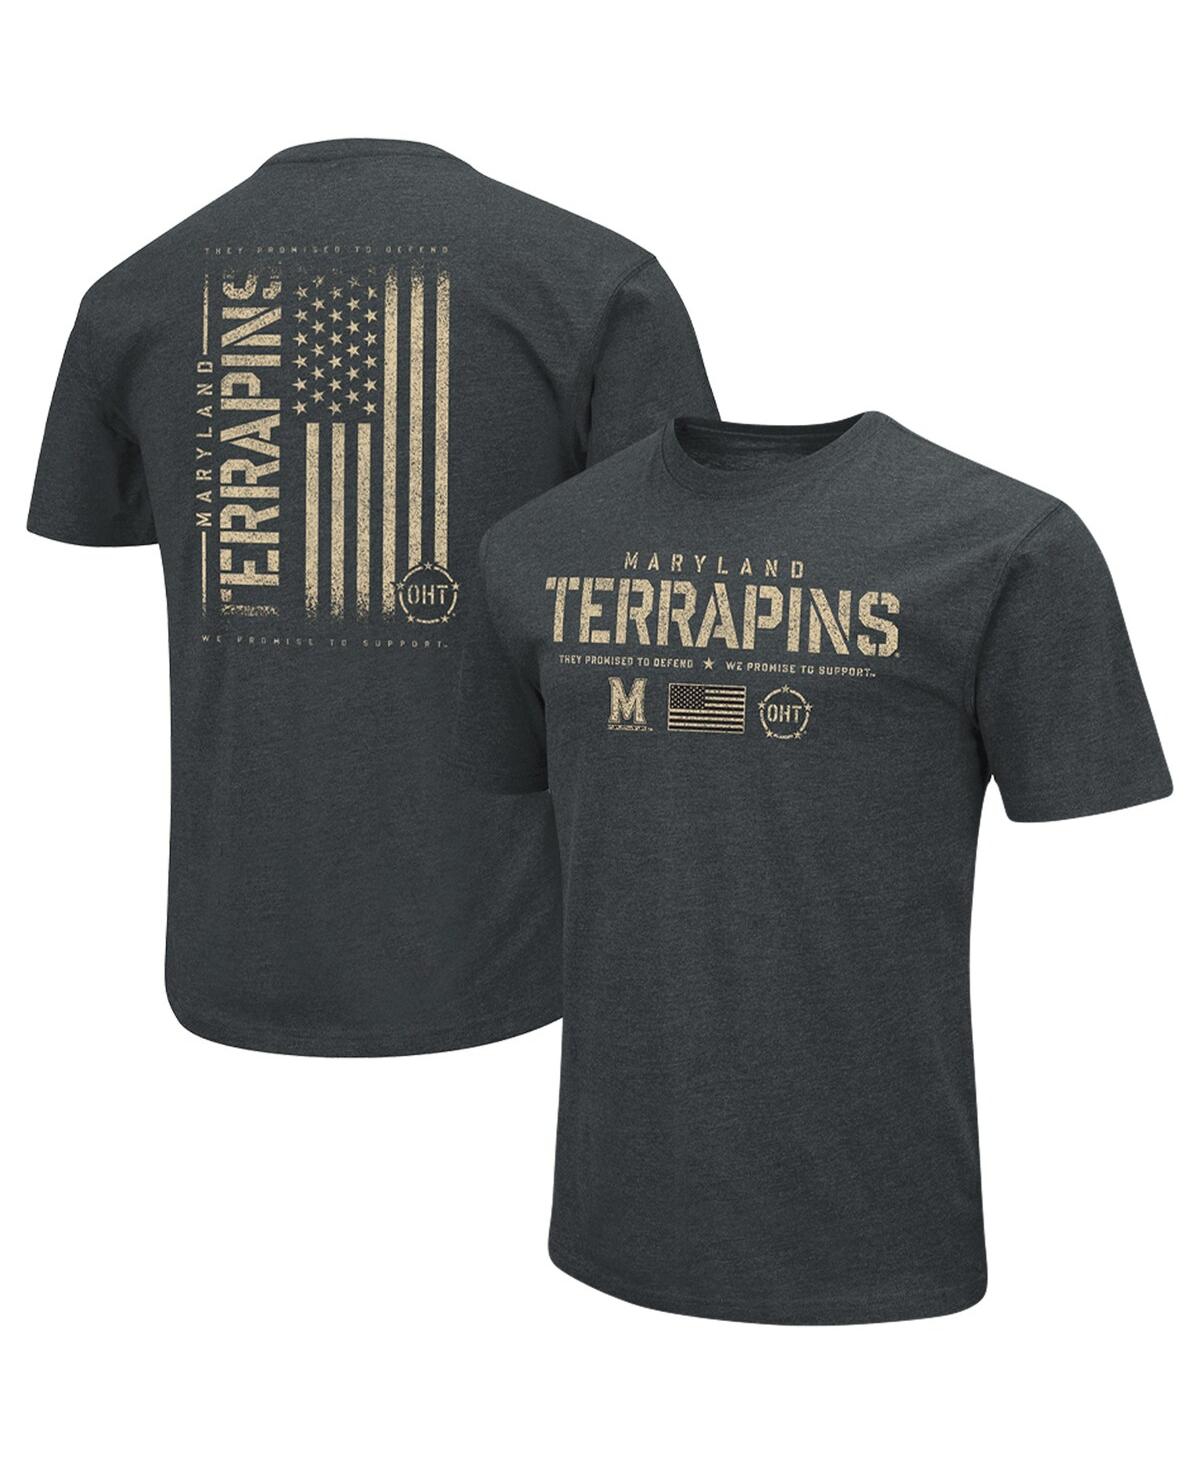 Men's Colosseum Heathered Black Maryland Terrapins Oht Military-Inspired Appreciation Flag 2.0 T-shirt - Heathered Black